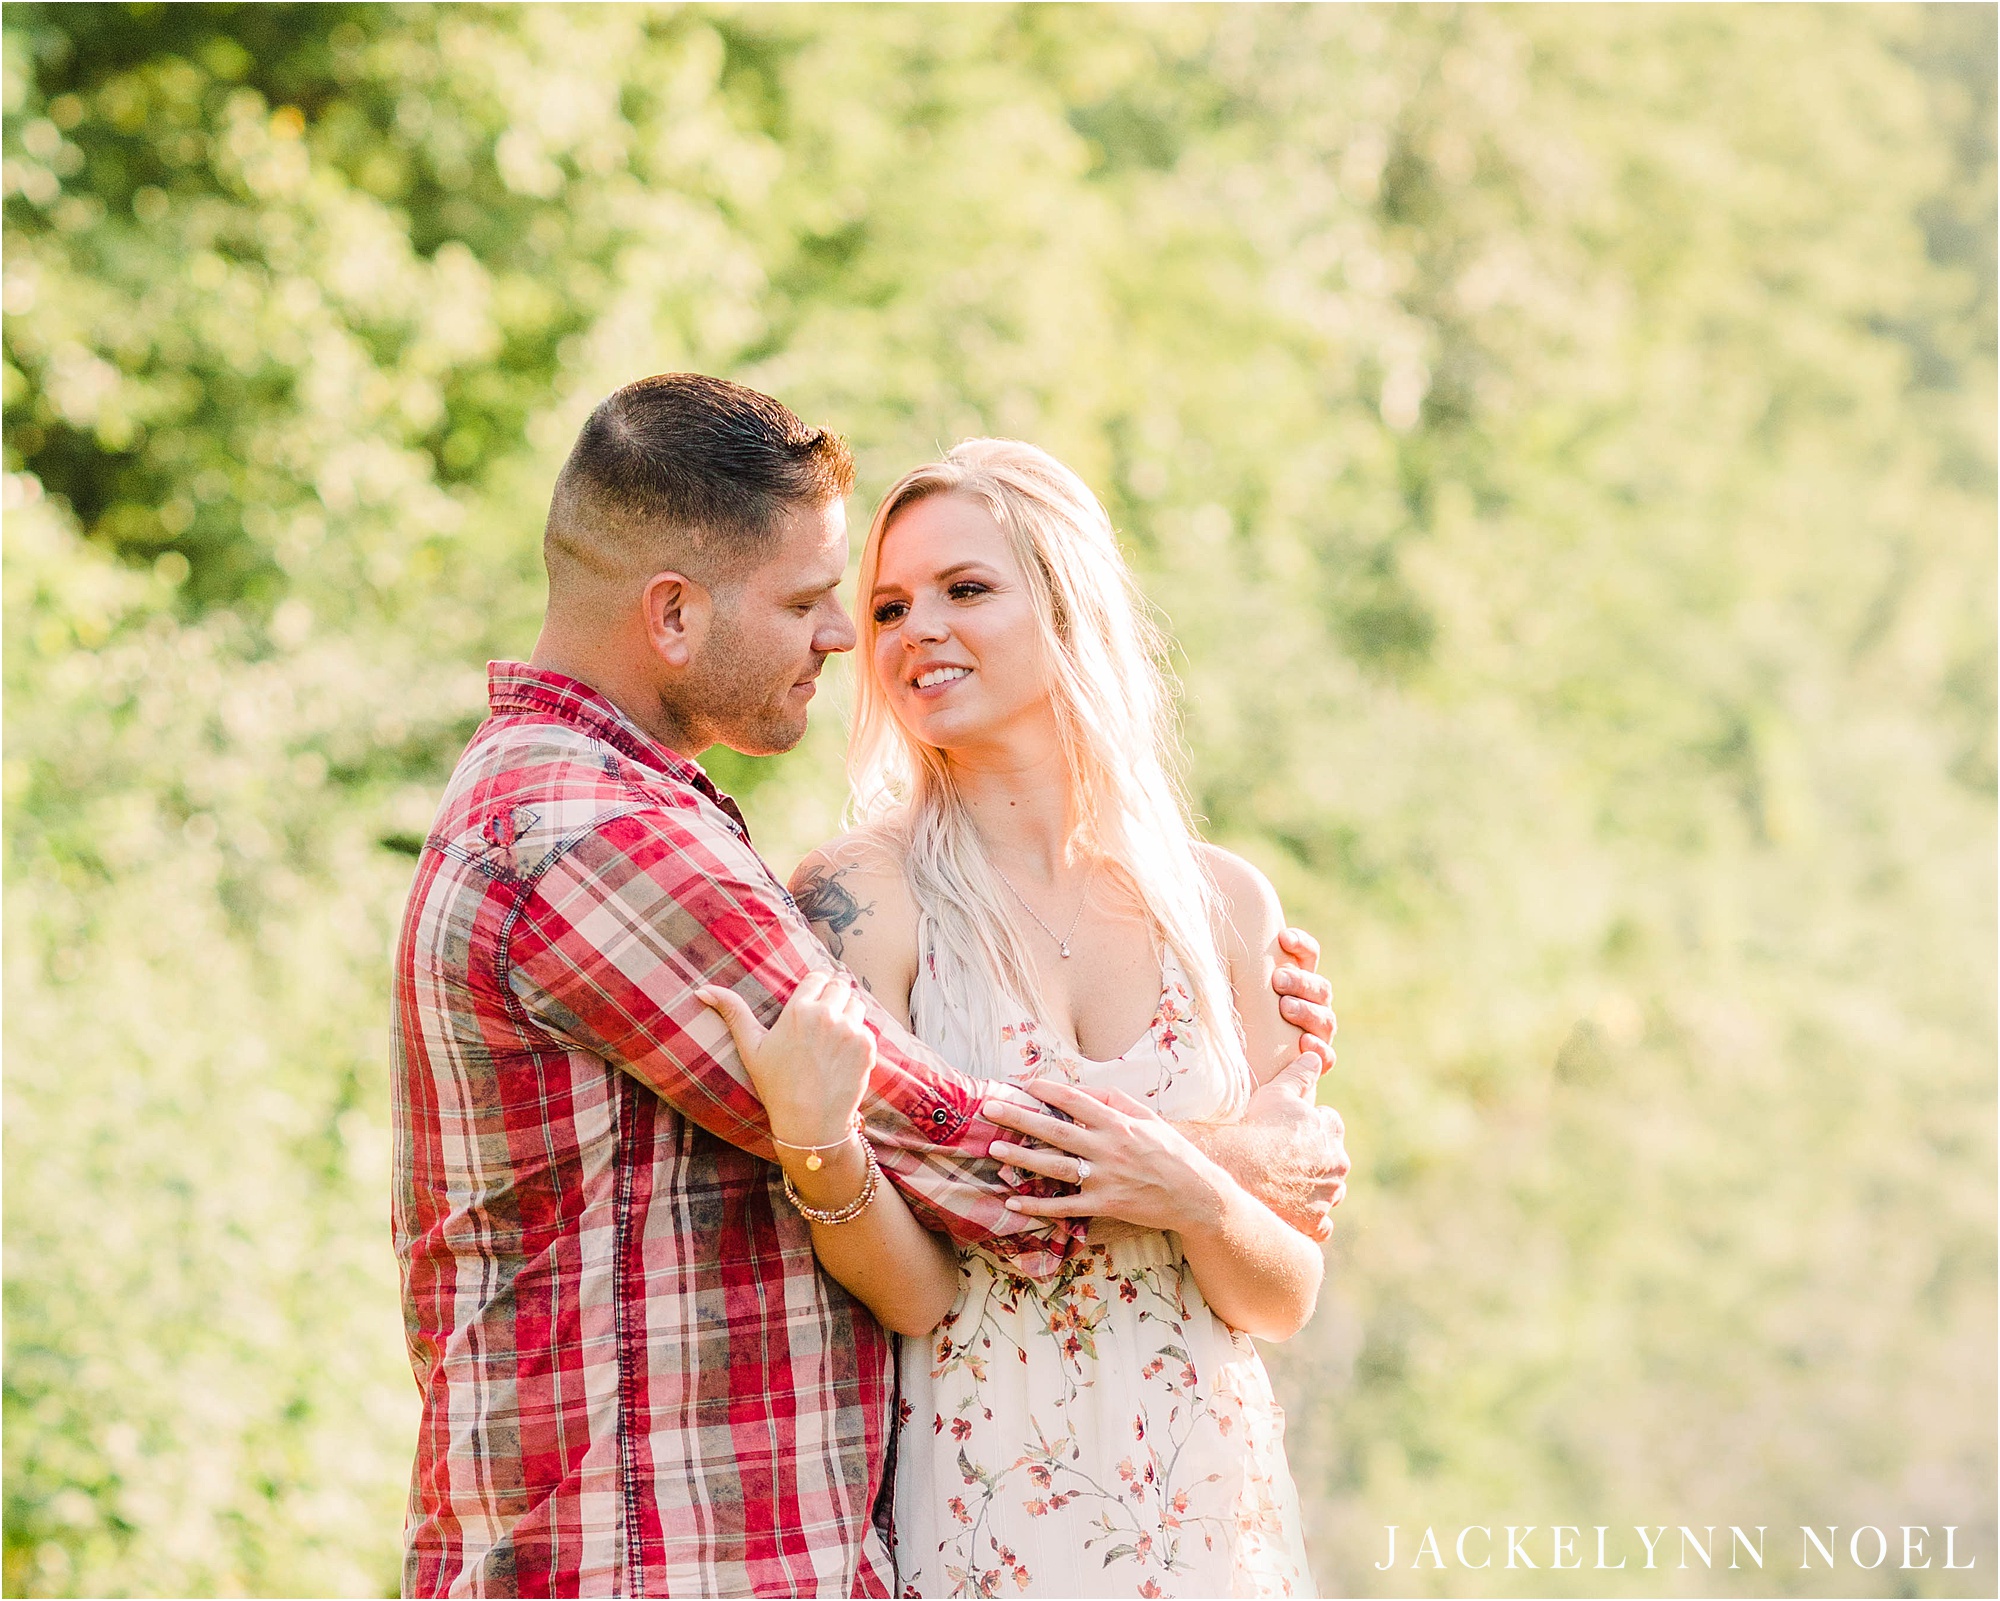 Megan and Rob - Hometown Farm Engagement Session in Troy, Illinois by Jackelynn Noel Photography